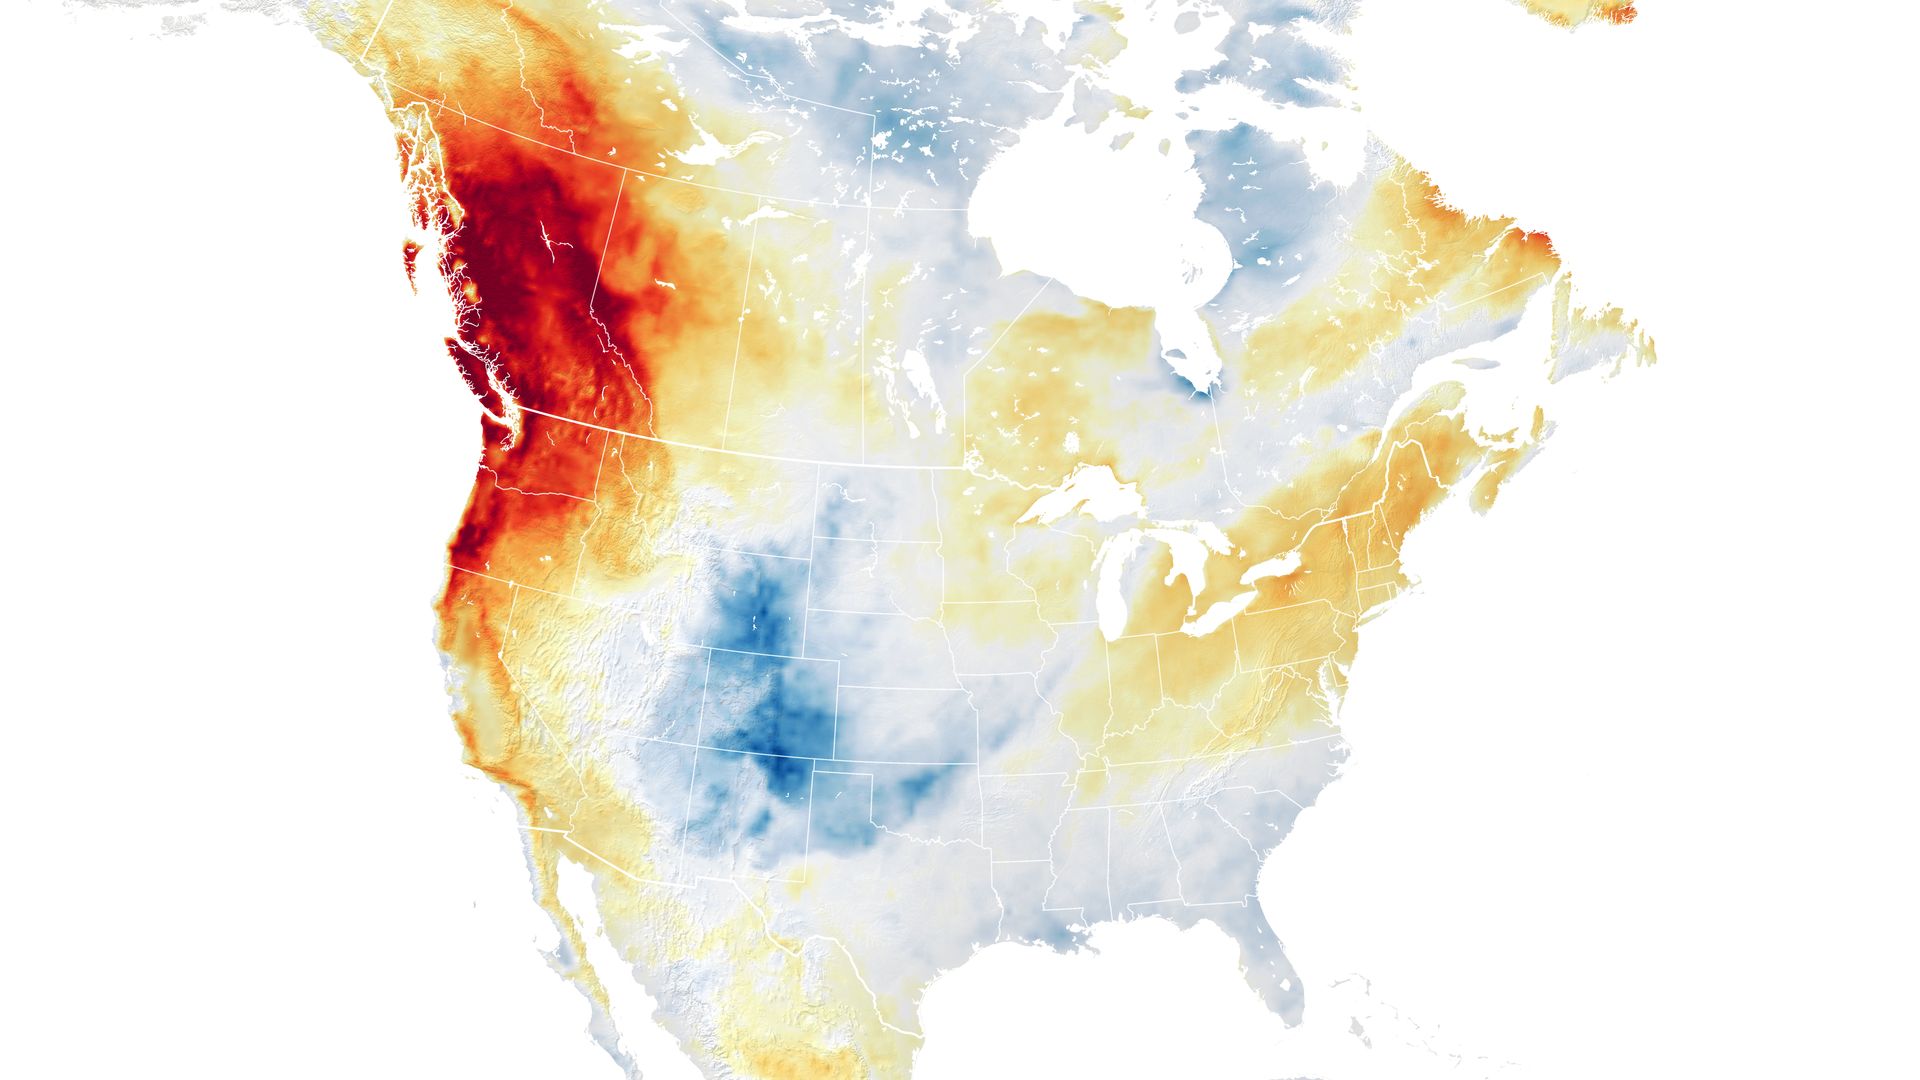 Map of the U.S. and Canada showing red colors where heat extremes were present on June 27, 2021.